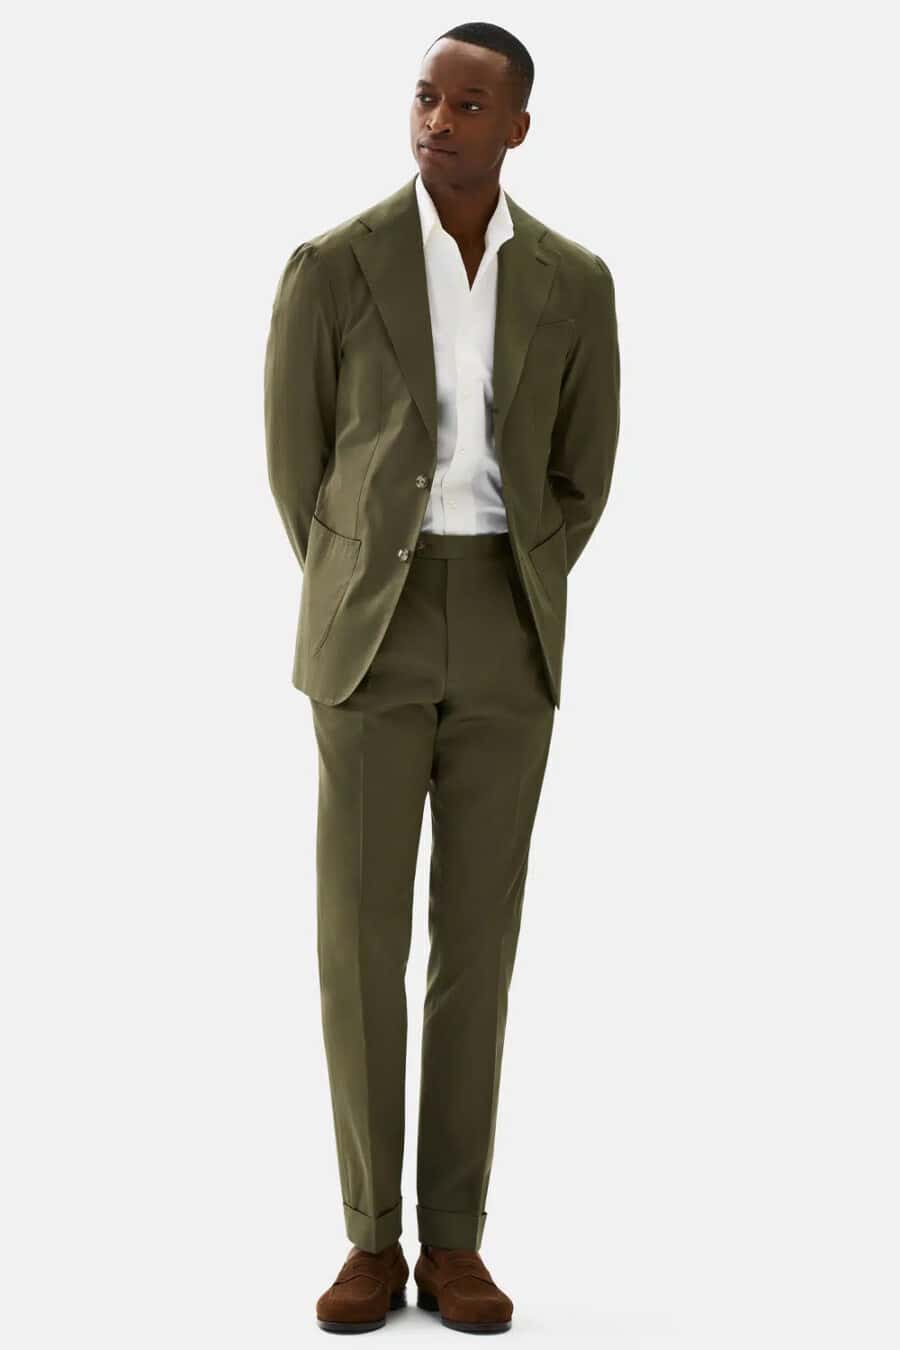 Men's green cotton suit, white shirt and tan brown suede penny loafers business casual outfit